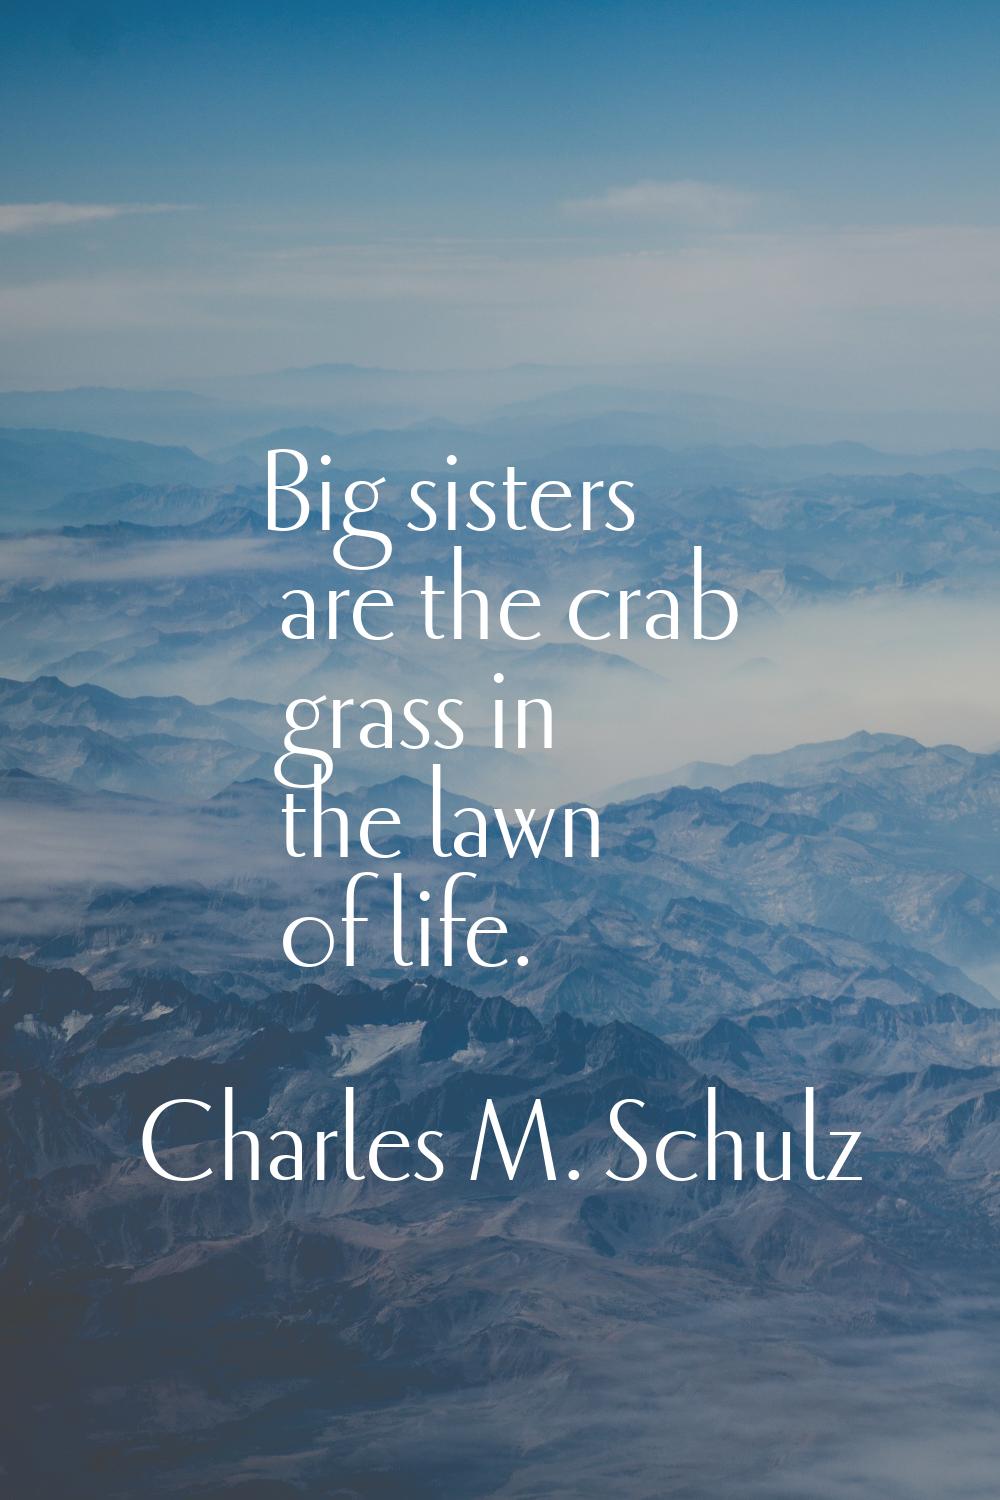 Big sisters are the crab grass in the lawn of life.